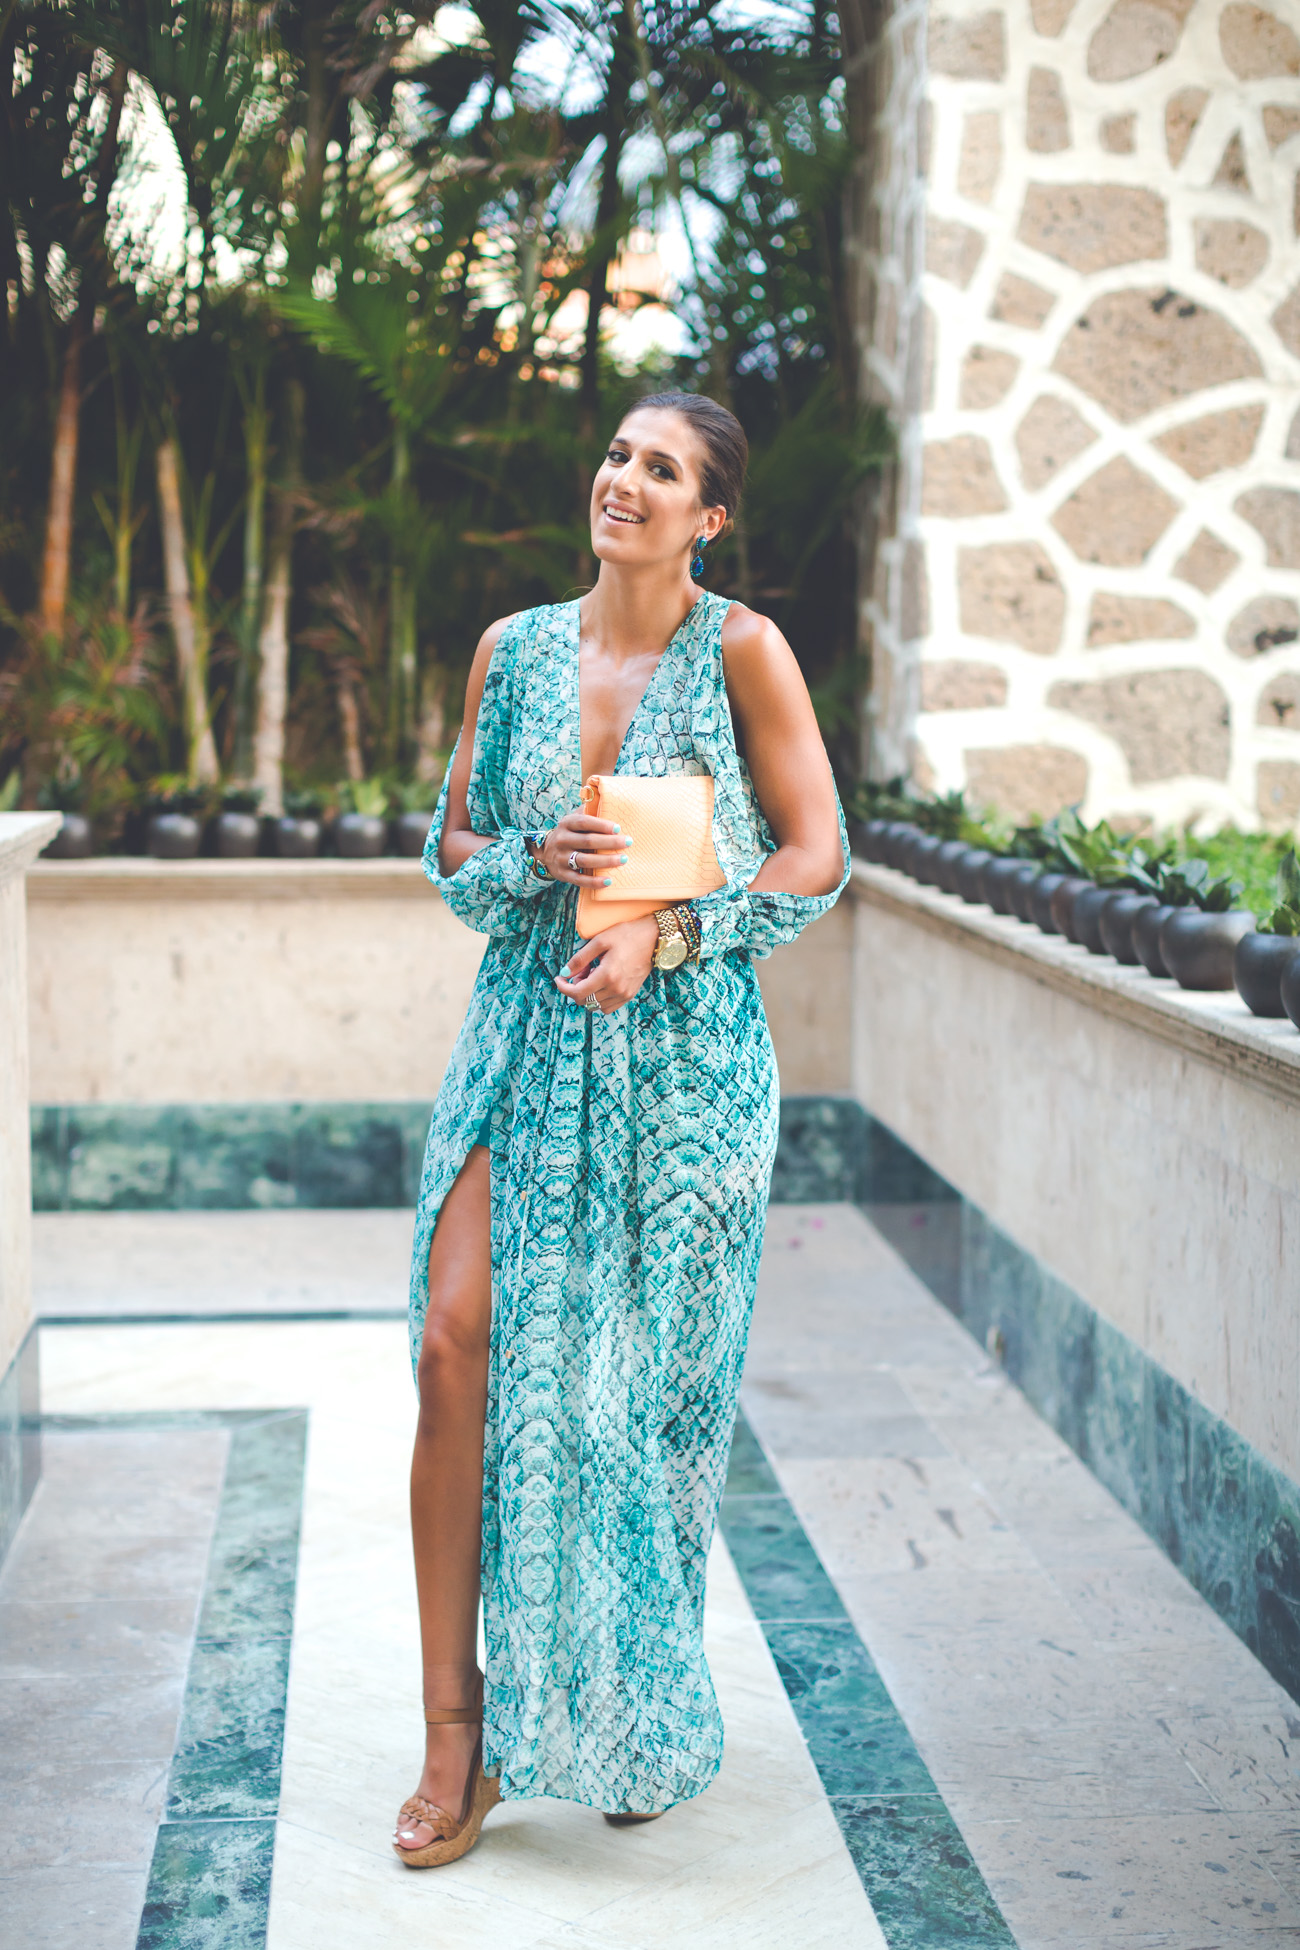 Maxi dress for any summer event - AOL Lifestyle